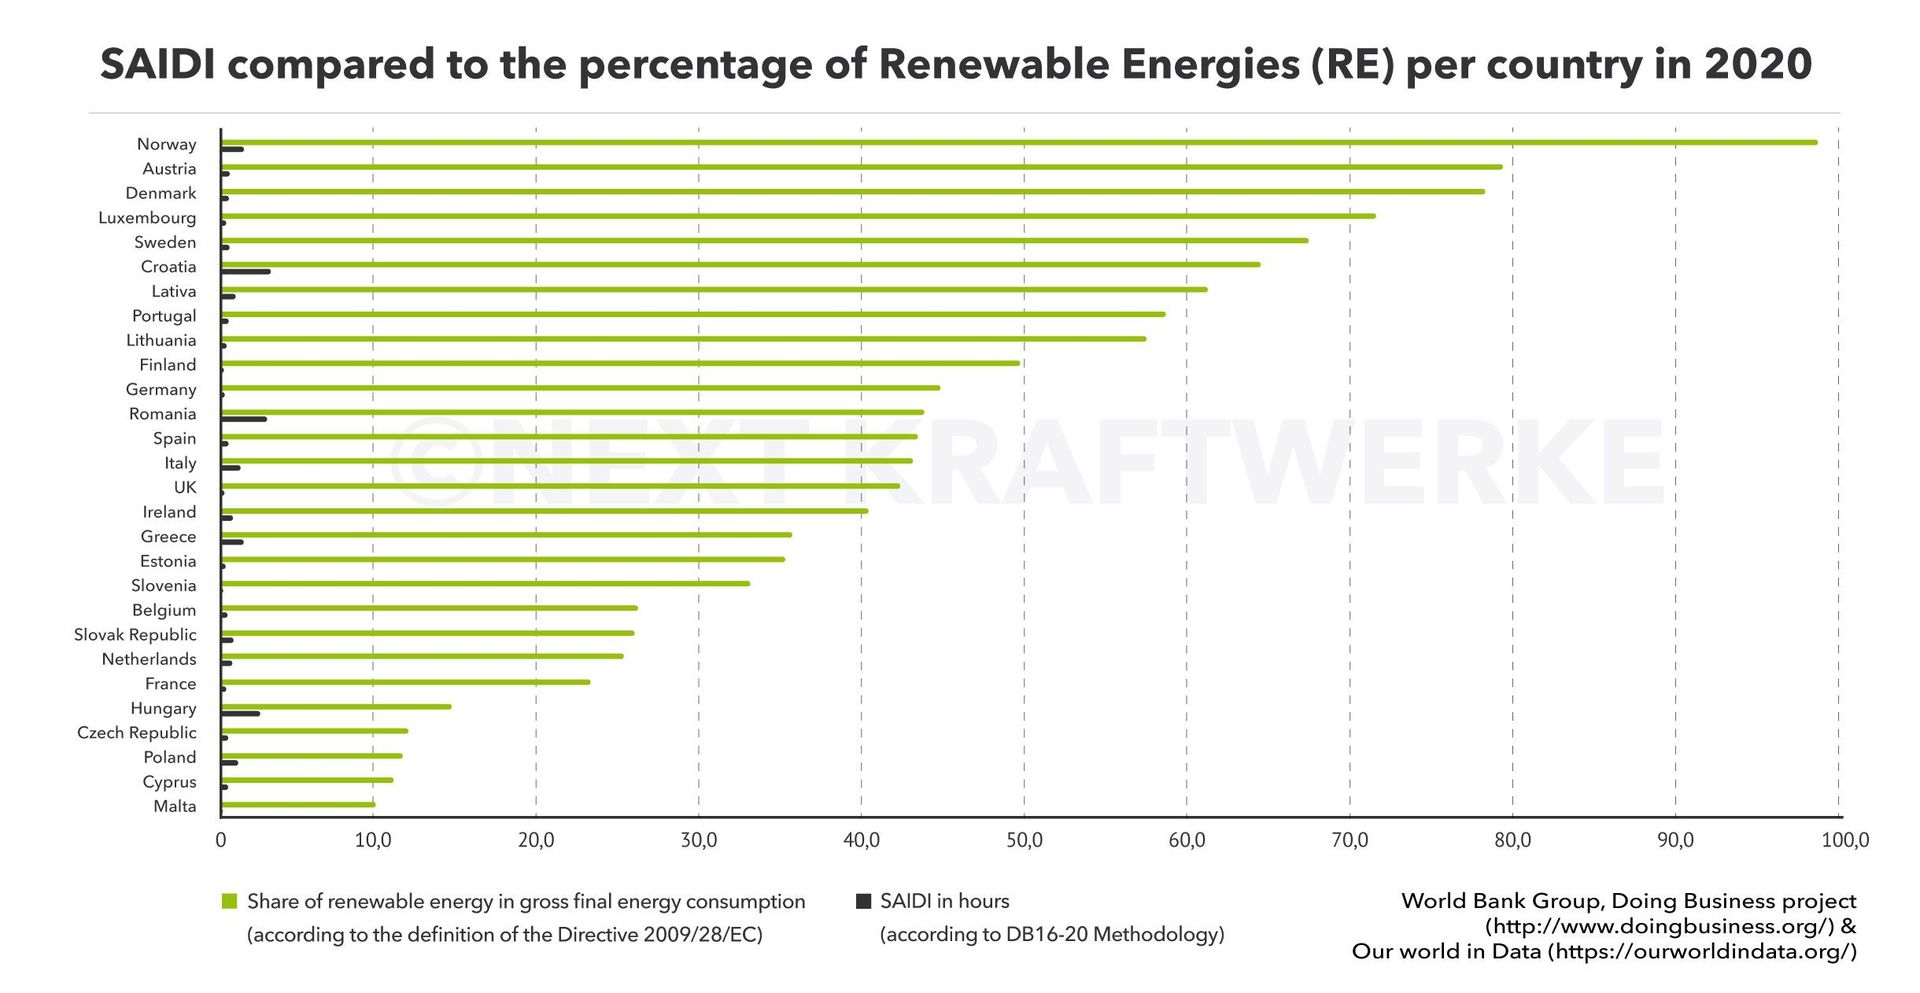 SAIDI compared to renewables per country in Europe